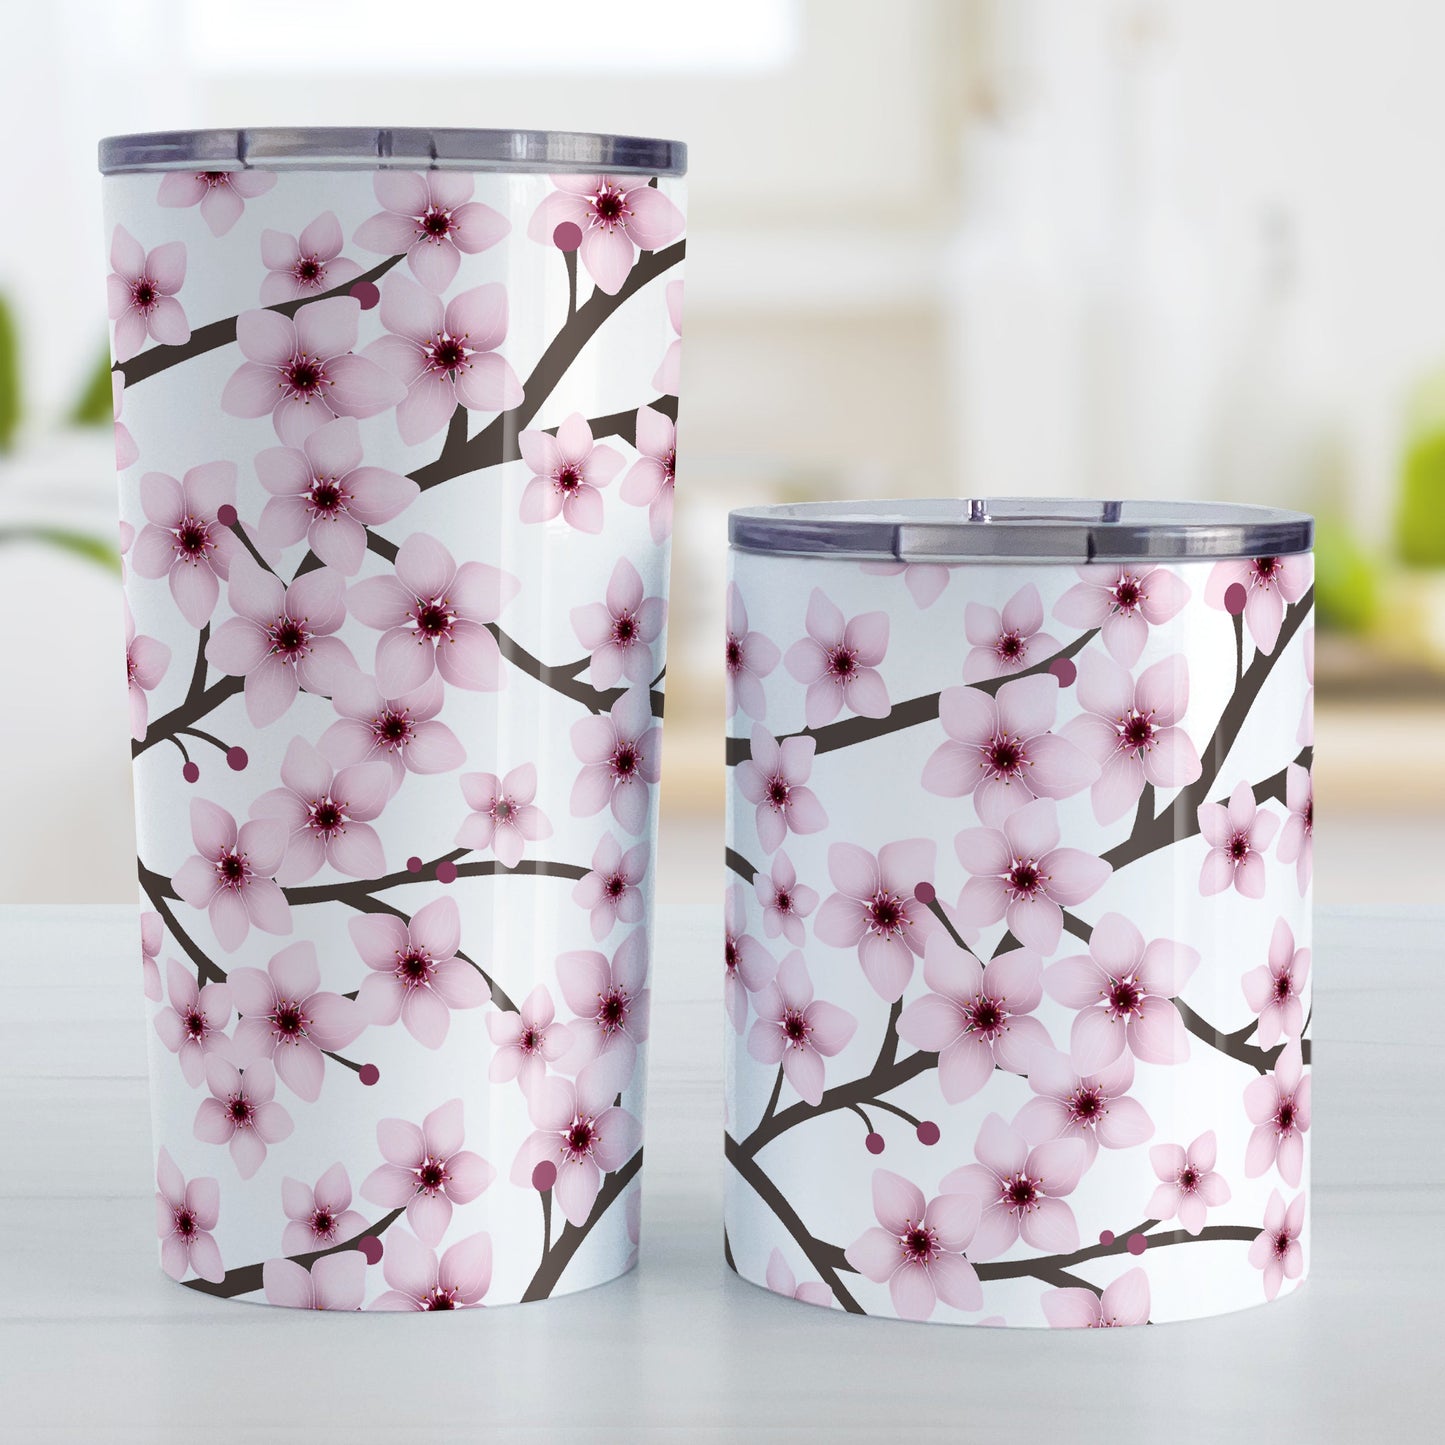 Cherry Blossom Tumbler Cup (20oz and 10oz) at Amy's Coffee Mugs. Stainless steel insulated tumbler cups designed with a pattern of pink cherry blossom flowers on branches that wraps around the cups. Photo shows both sized cups next to each other.